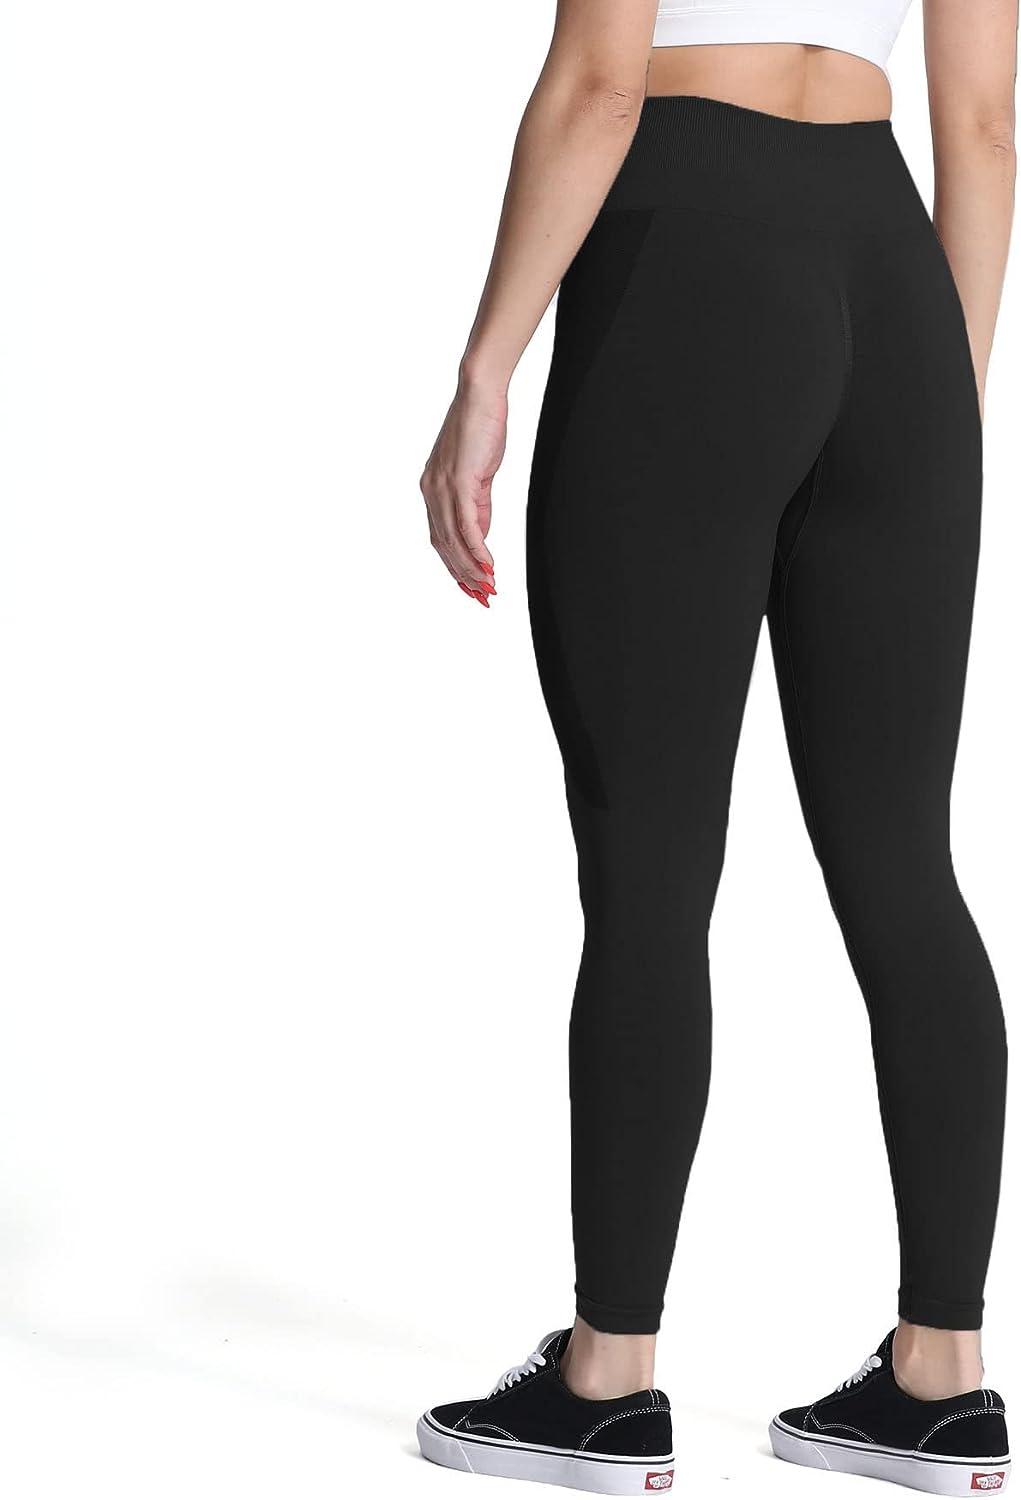 Aoxjox High Waisted Workout Leggings for Women Tummy Control Buttery Soft  Yog